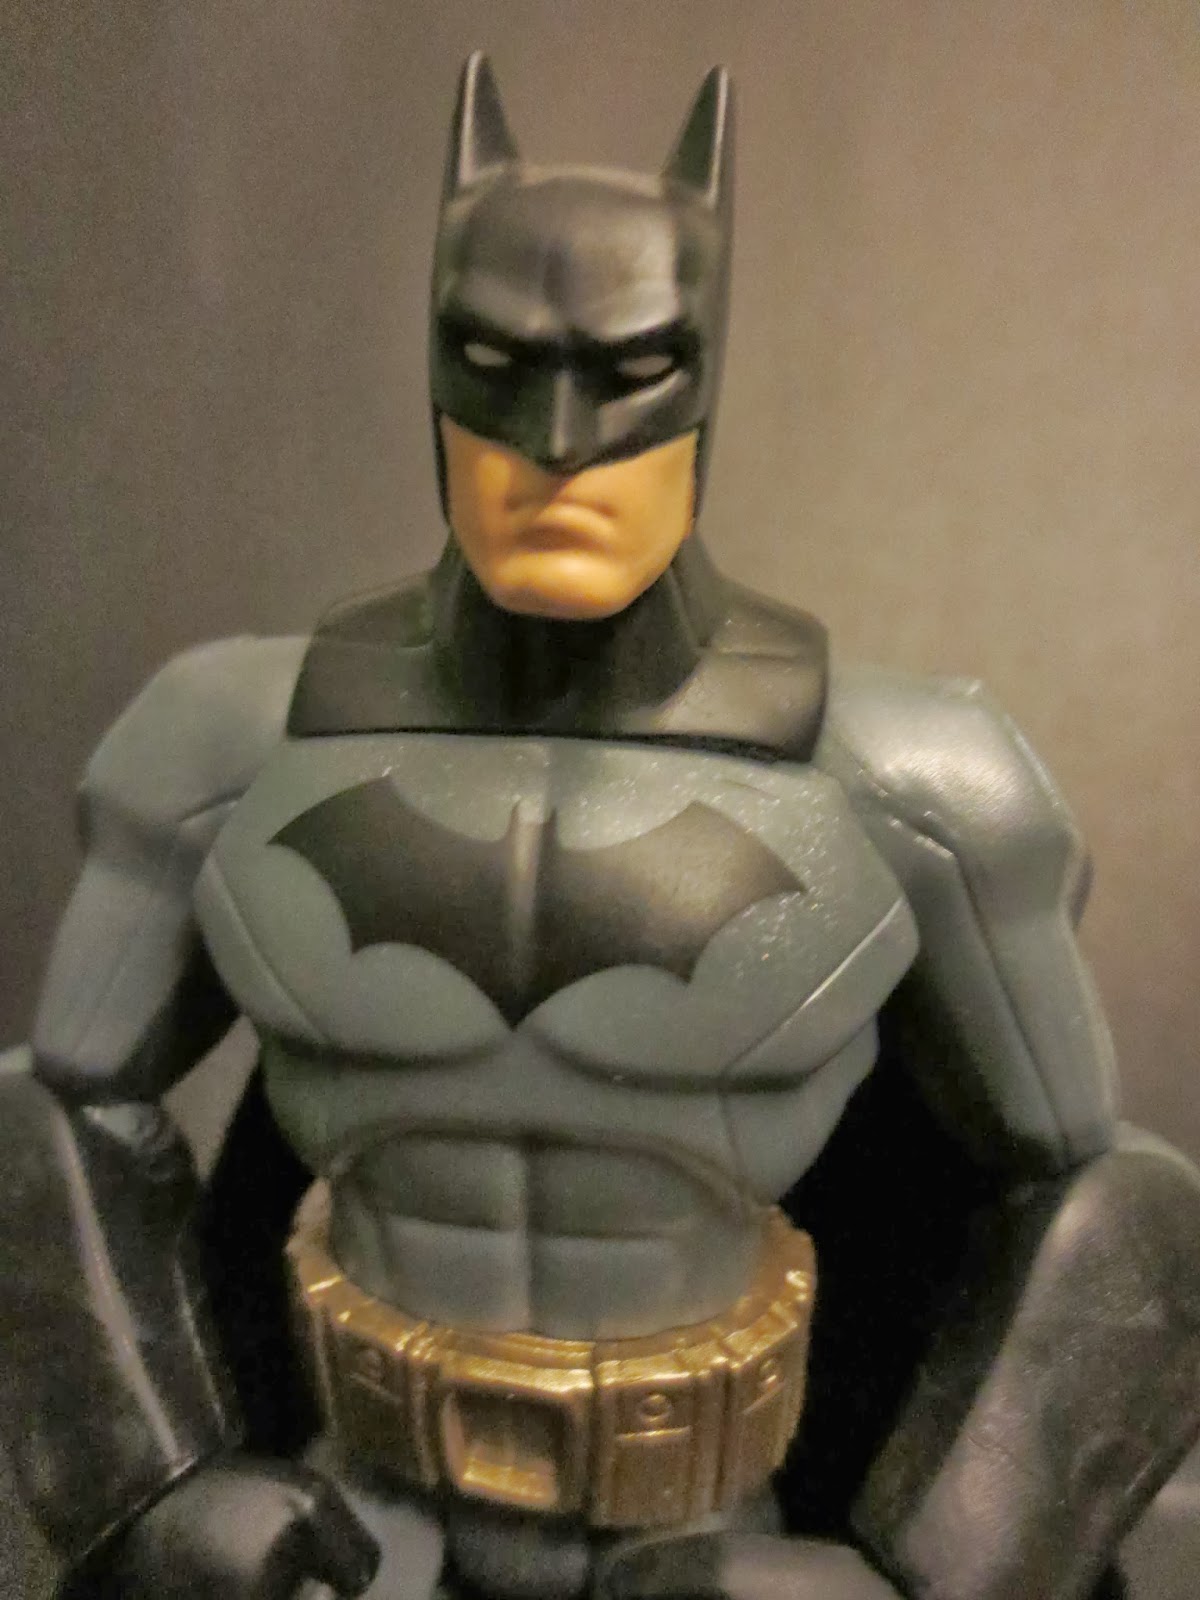 Action Figure Review: Batman from DC Total Heroes by Mattel